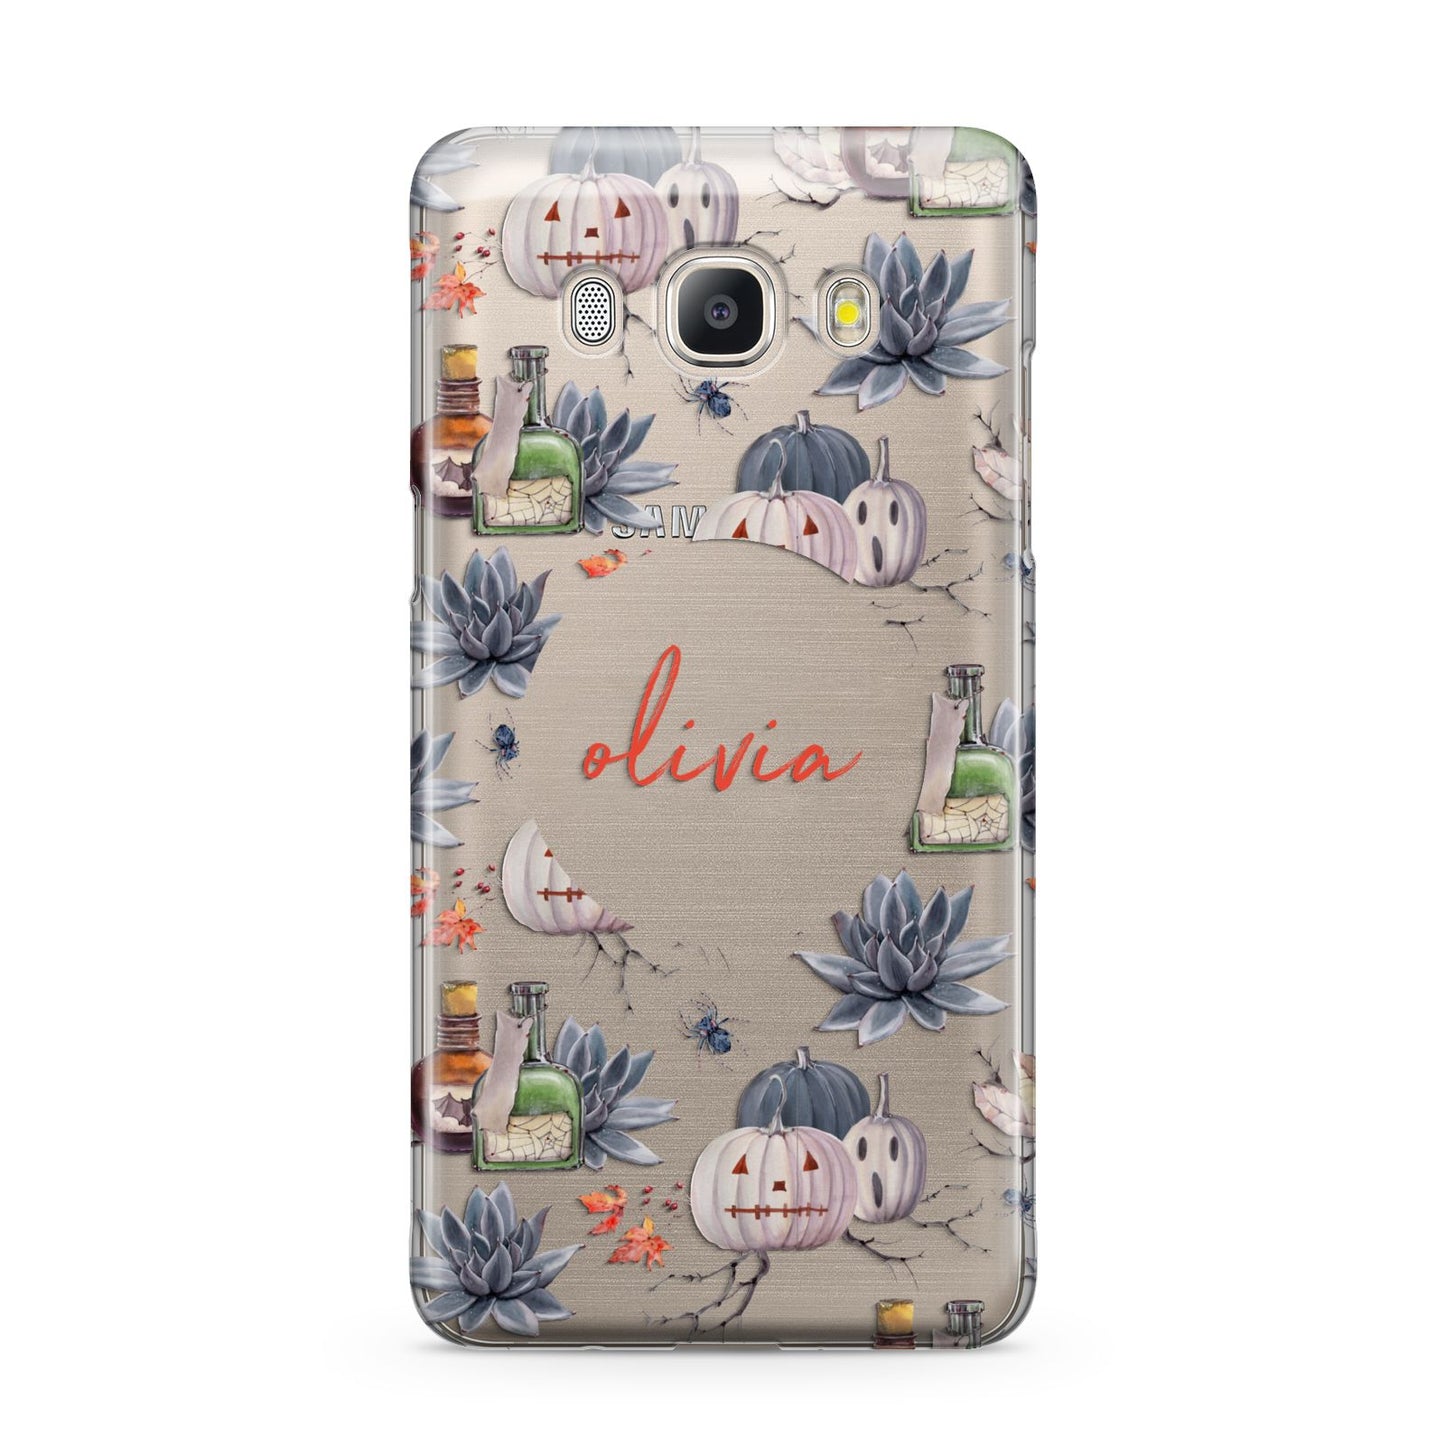 Personalised Floral Name Halloween Samsung Galaxy J5 2016 Case